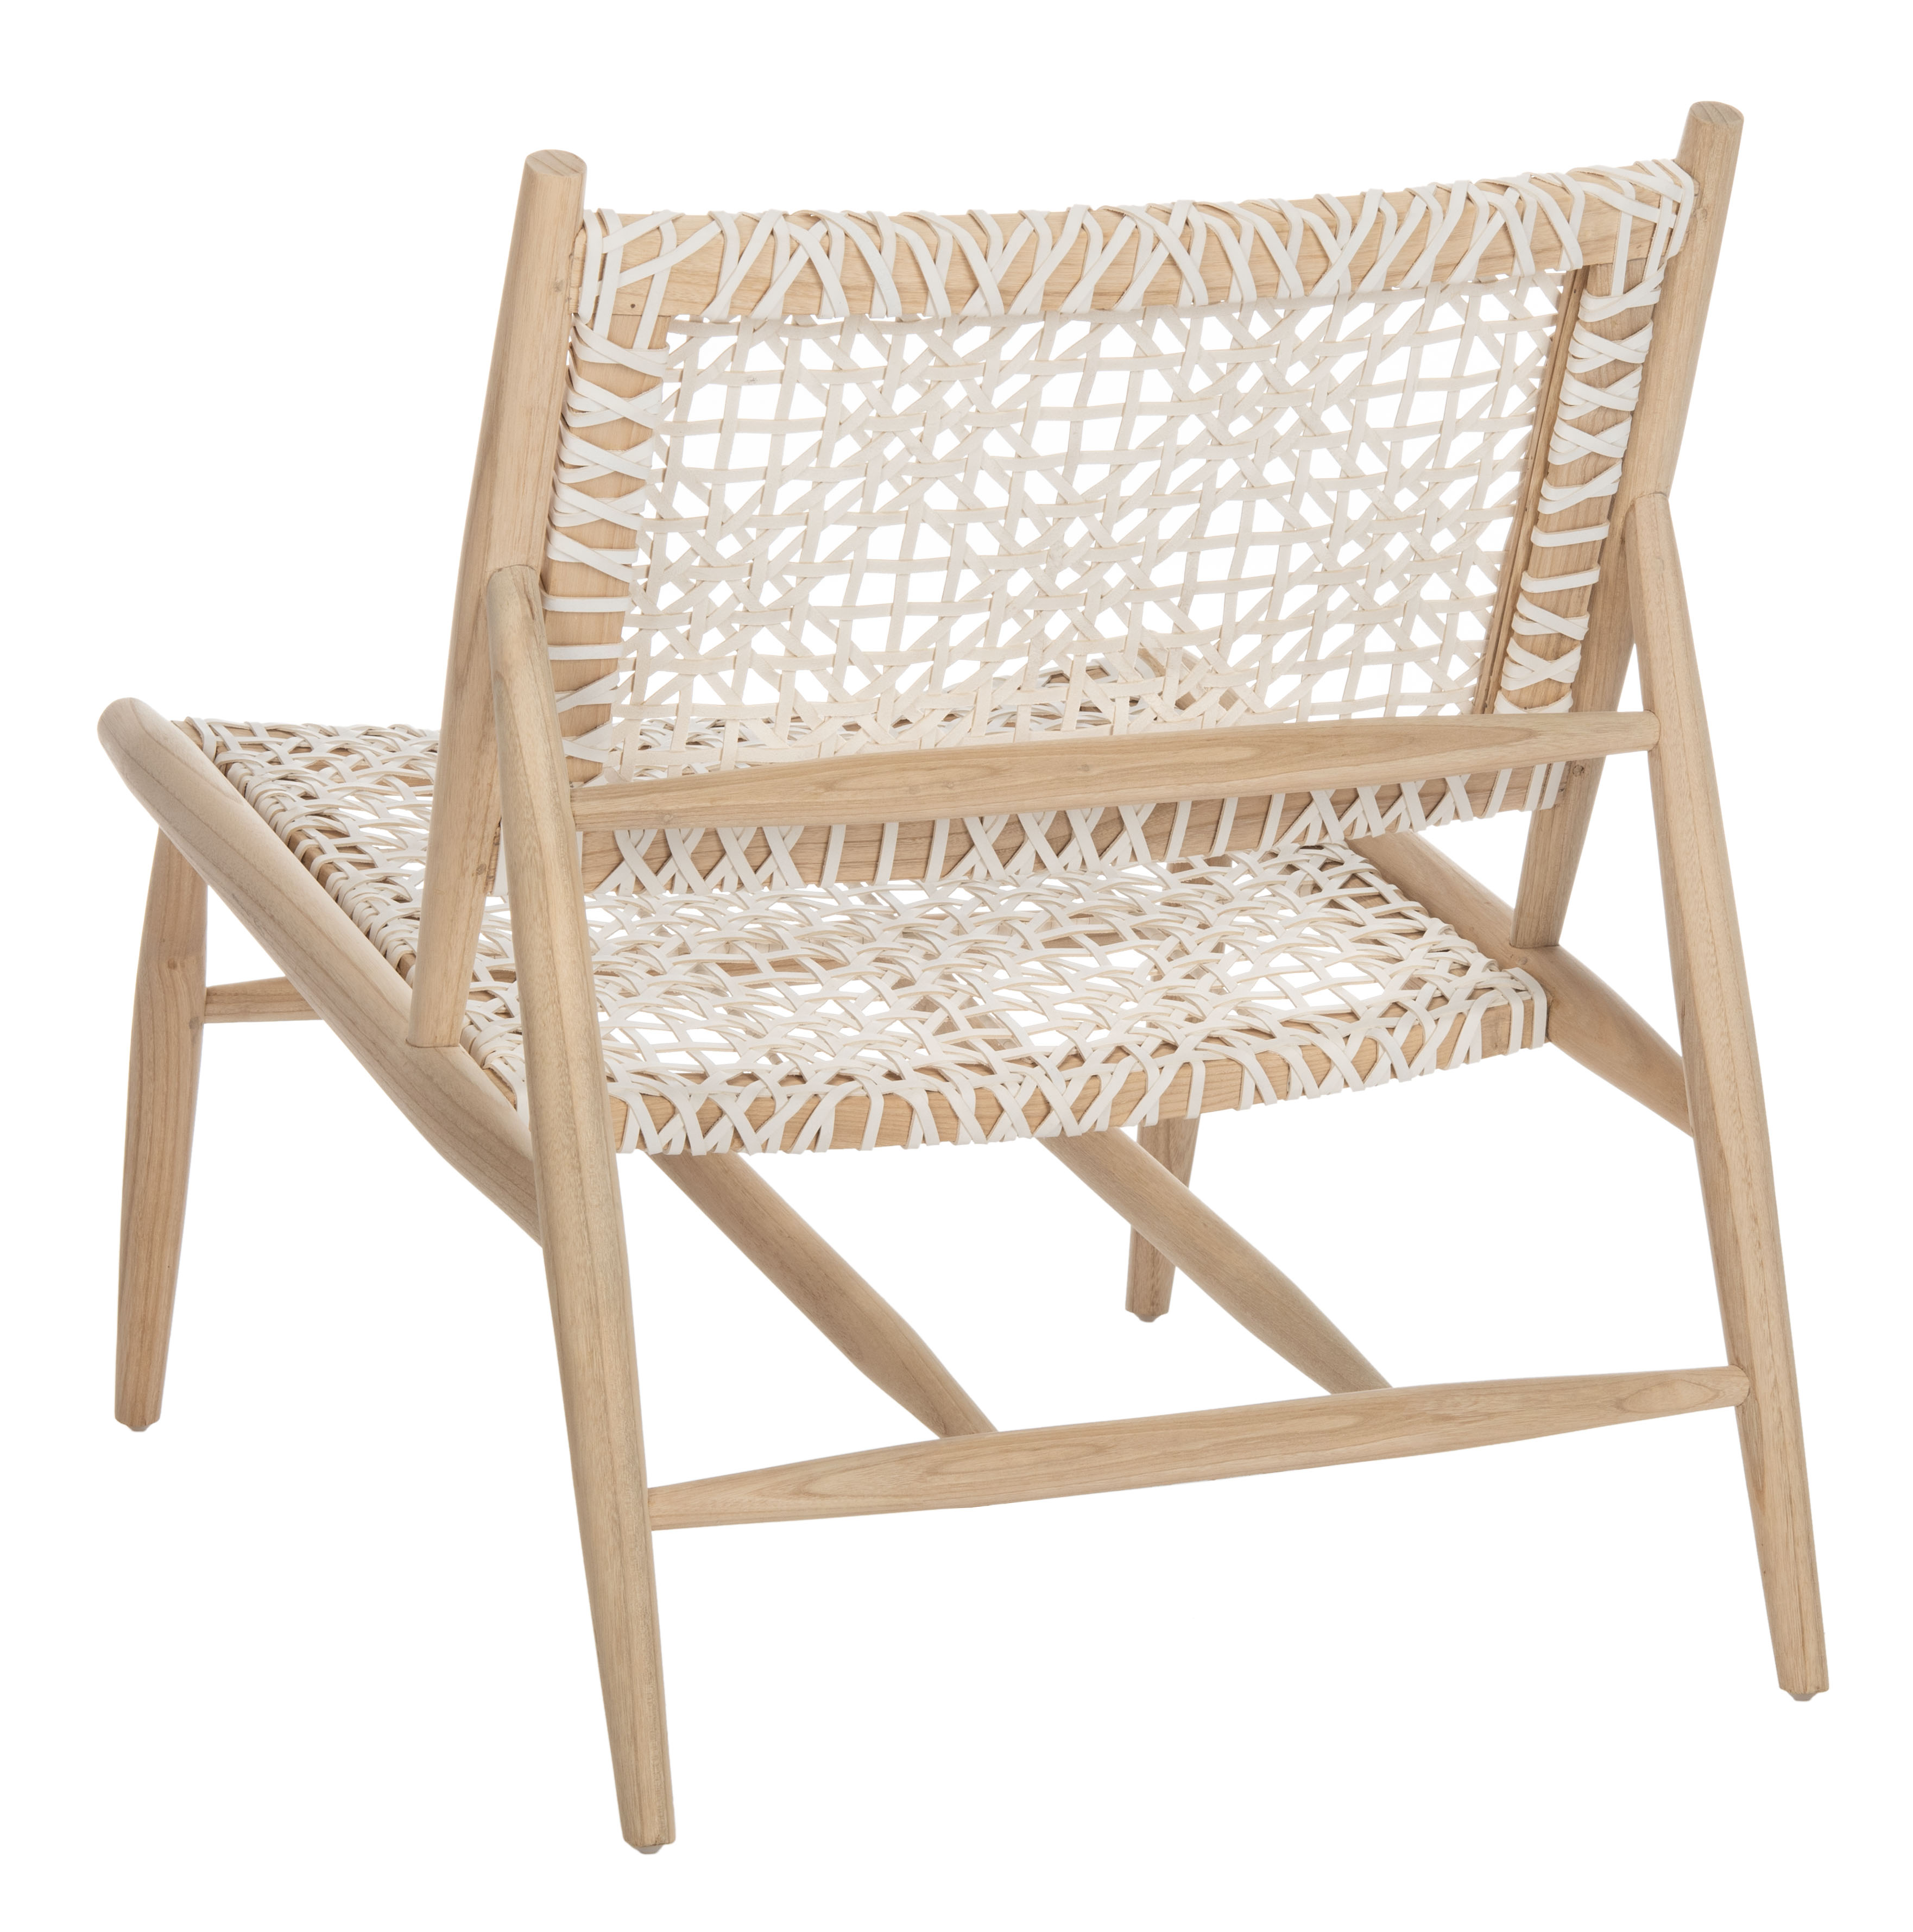 SAFAVIEH Bandelier Leather Weave Nautical Club Chair, Natural/White - image 9 of 11